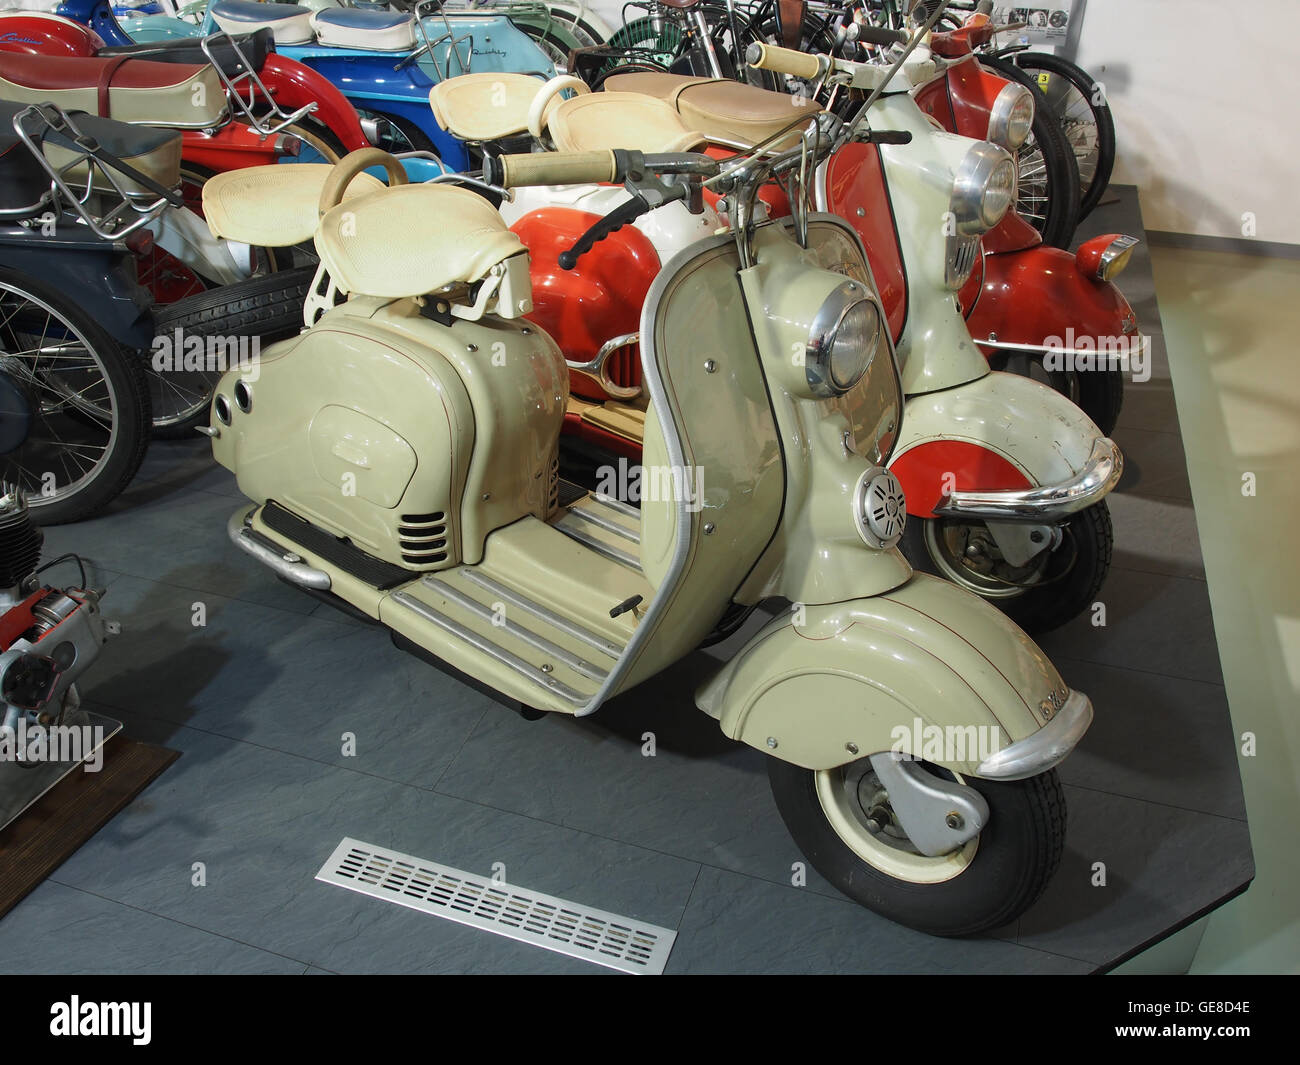 Nsu Lambretta High Resolution Stock Photography and Images - Alamy